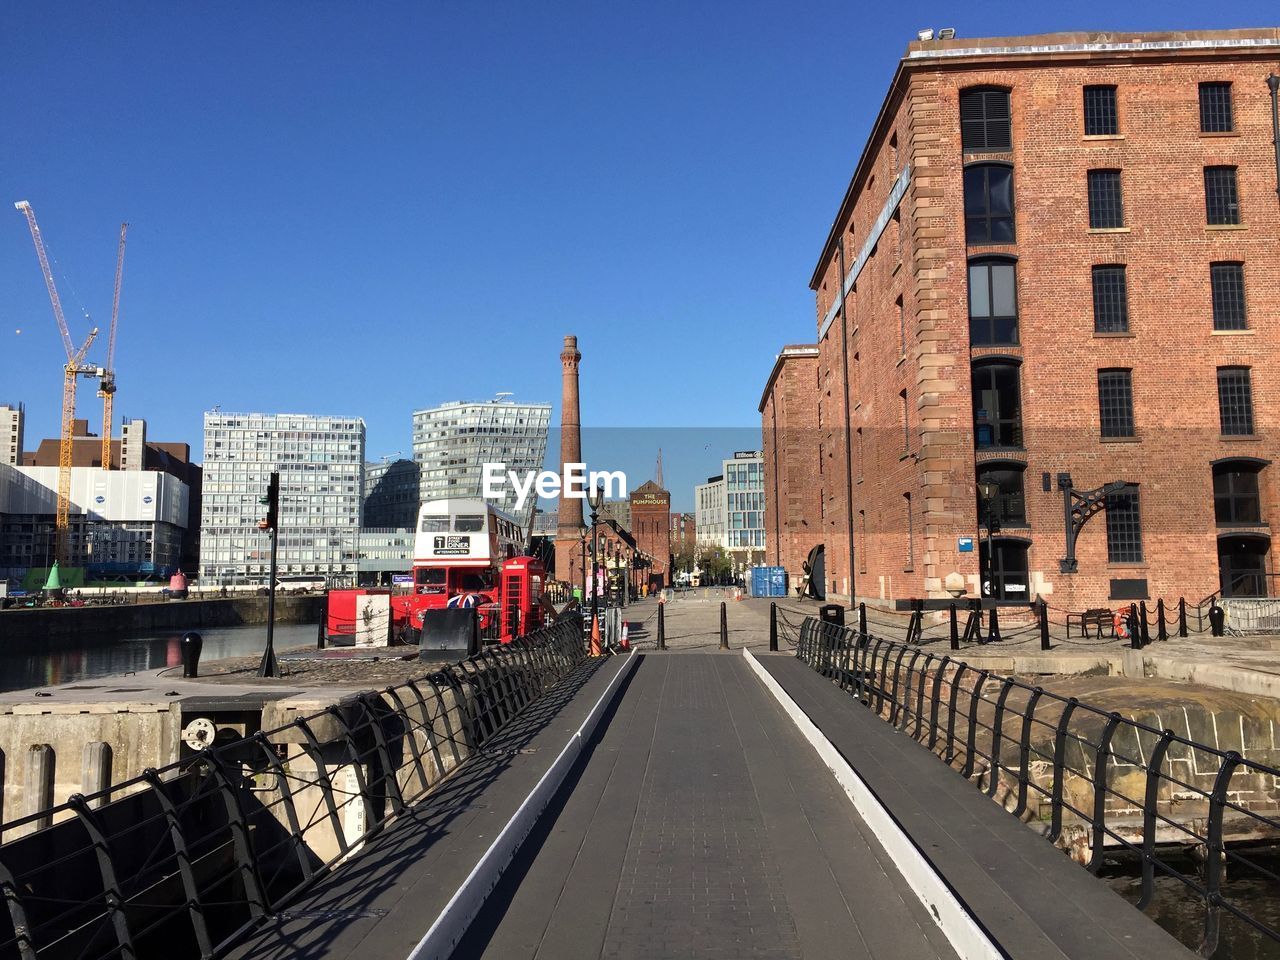 View from the royal albert dock - a complex of dock buildings and warehouses in liverpool, england